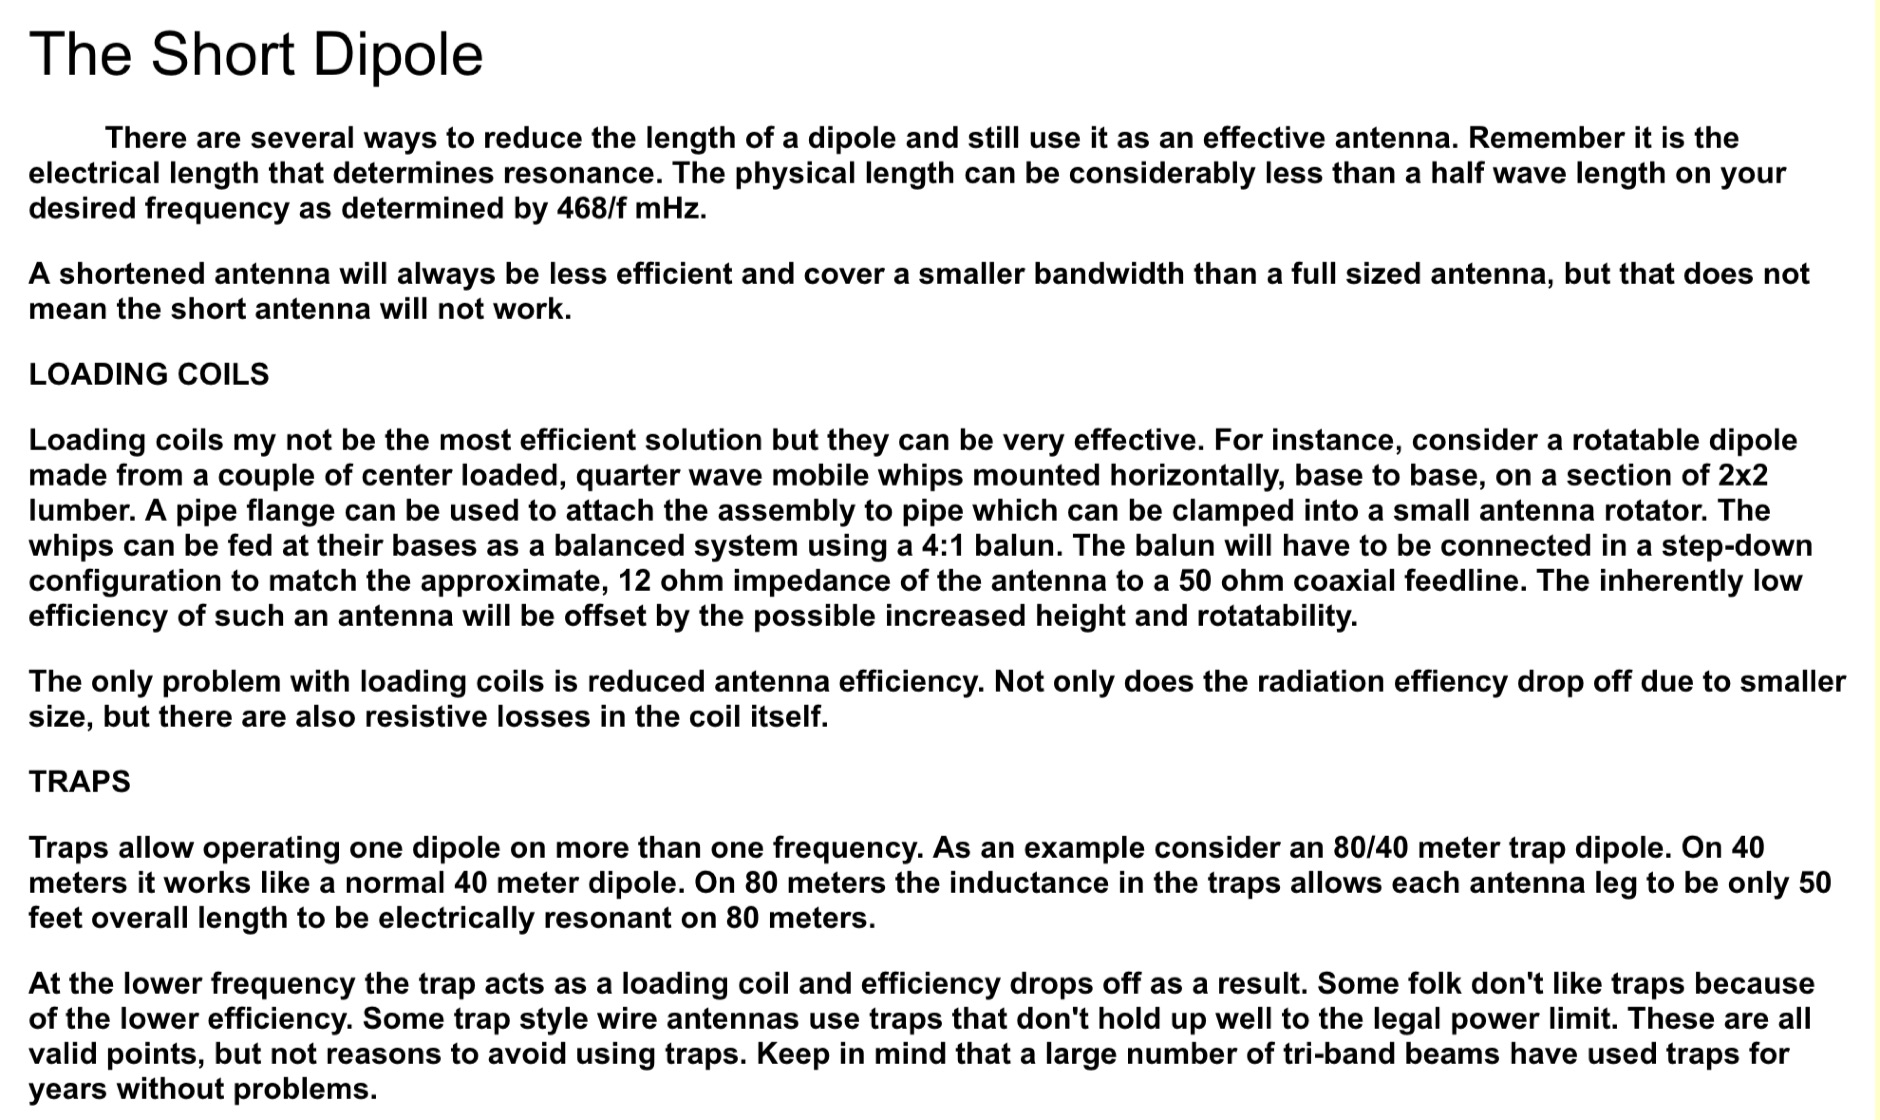 The Short Dipole